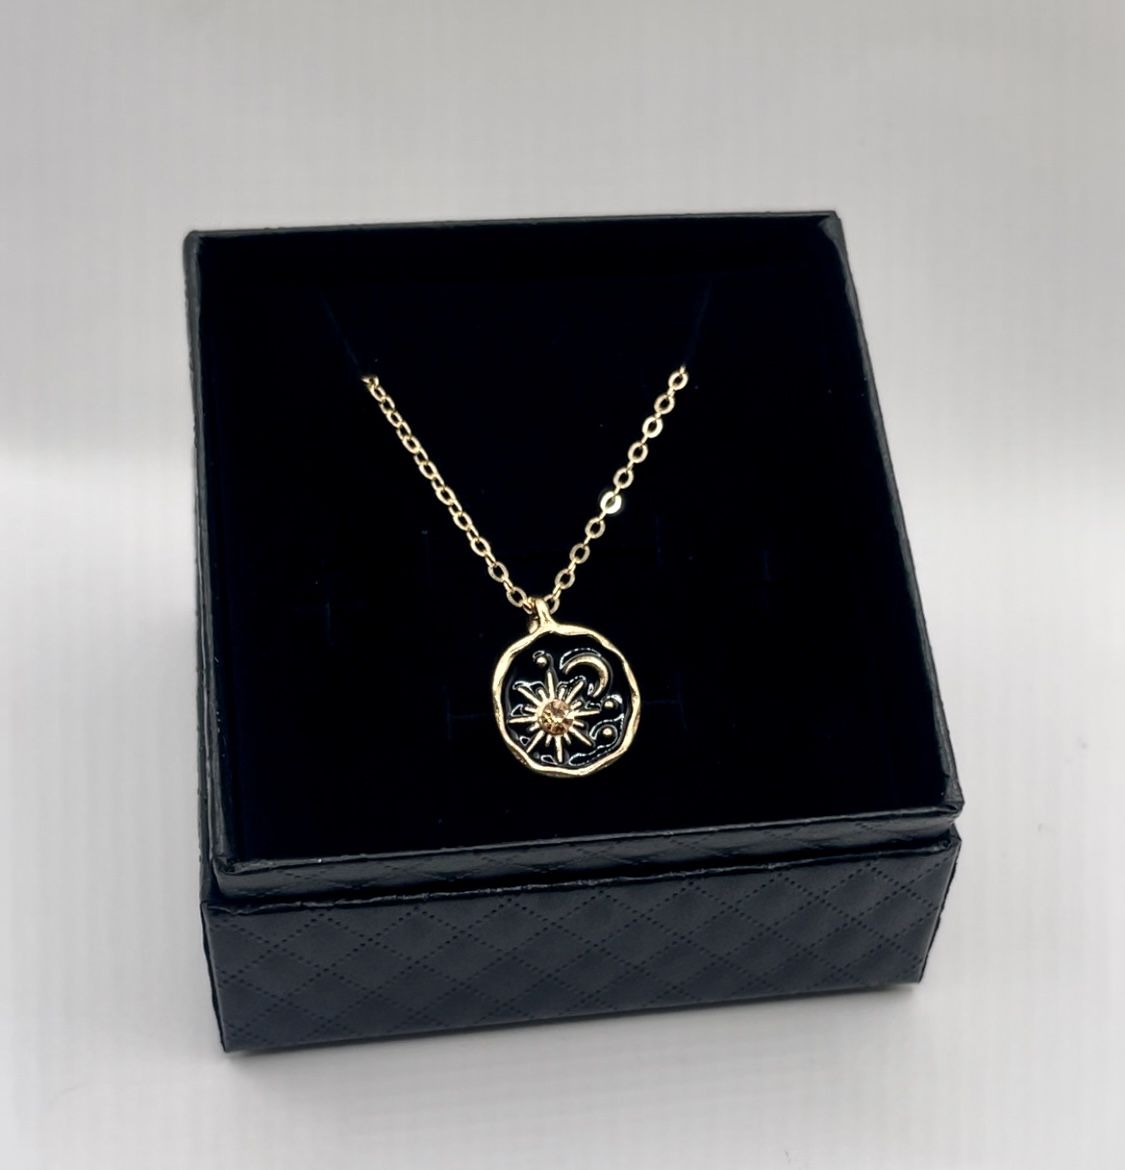 Brand New Moon And Sun Golden Chain Necklace In Gift Box 